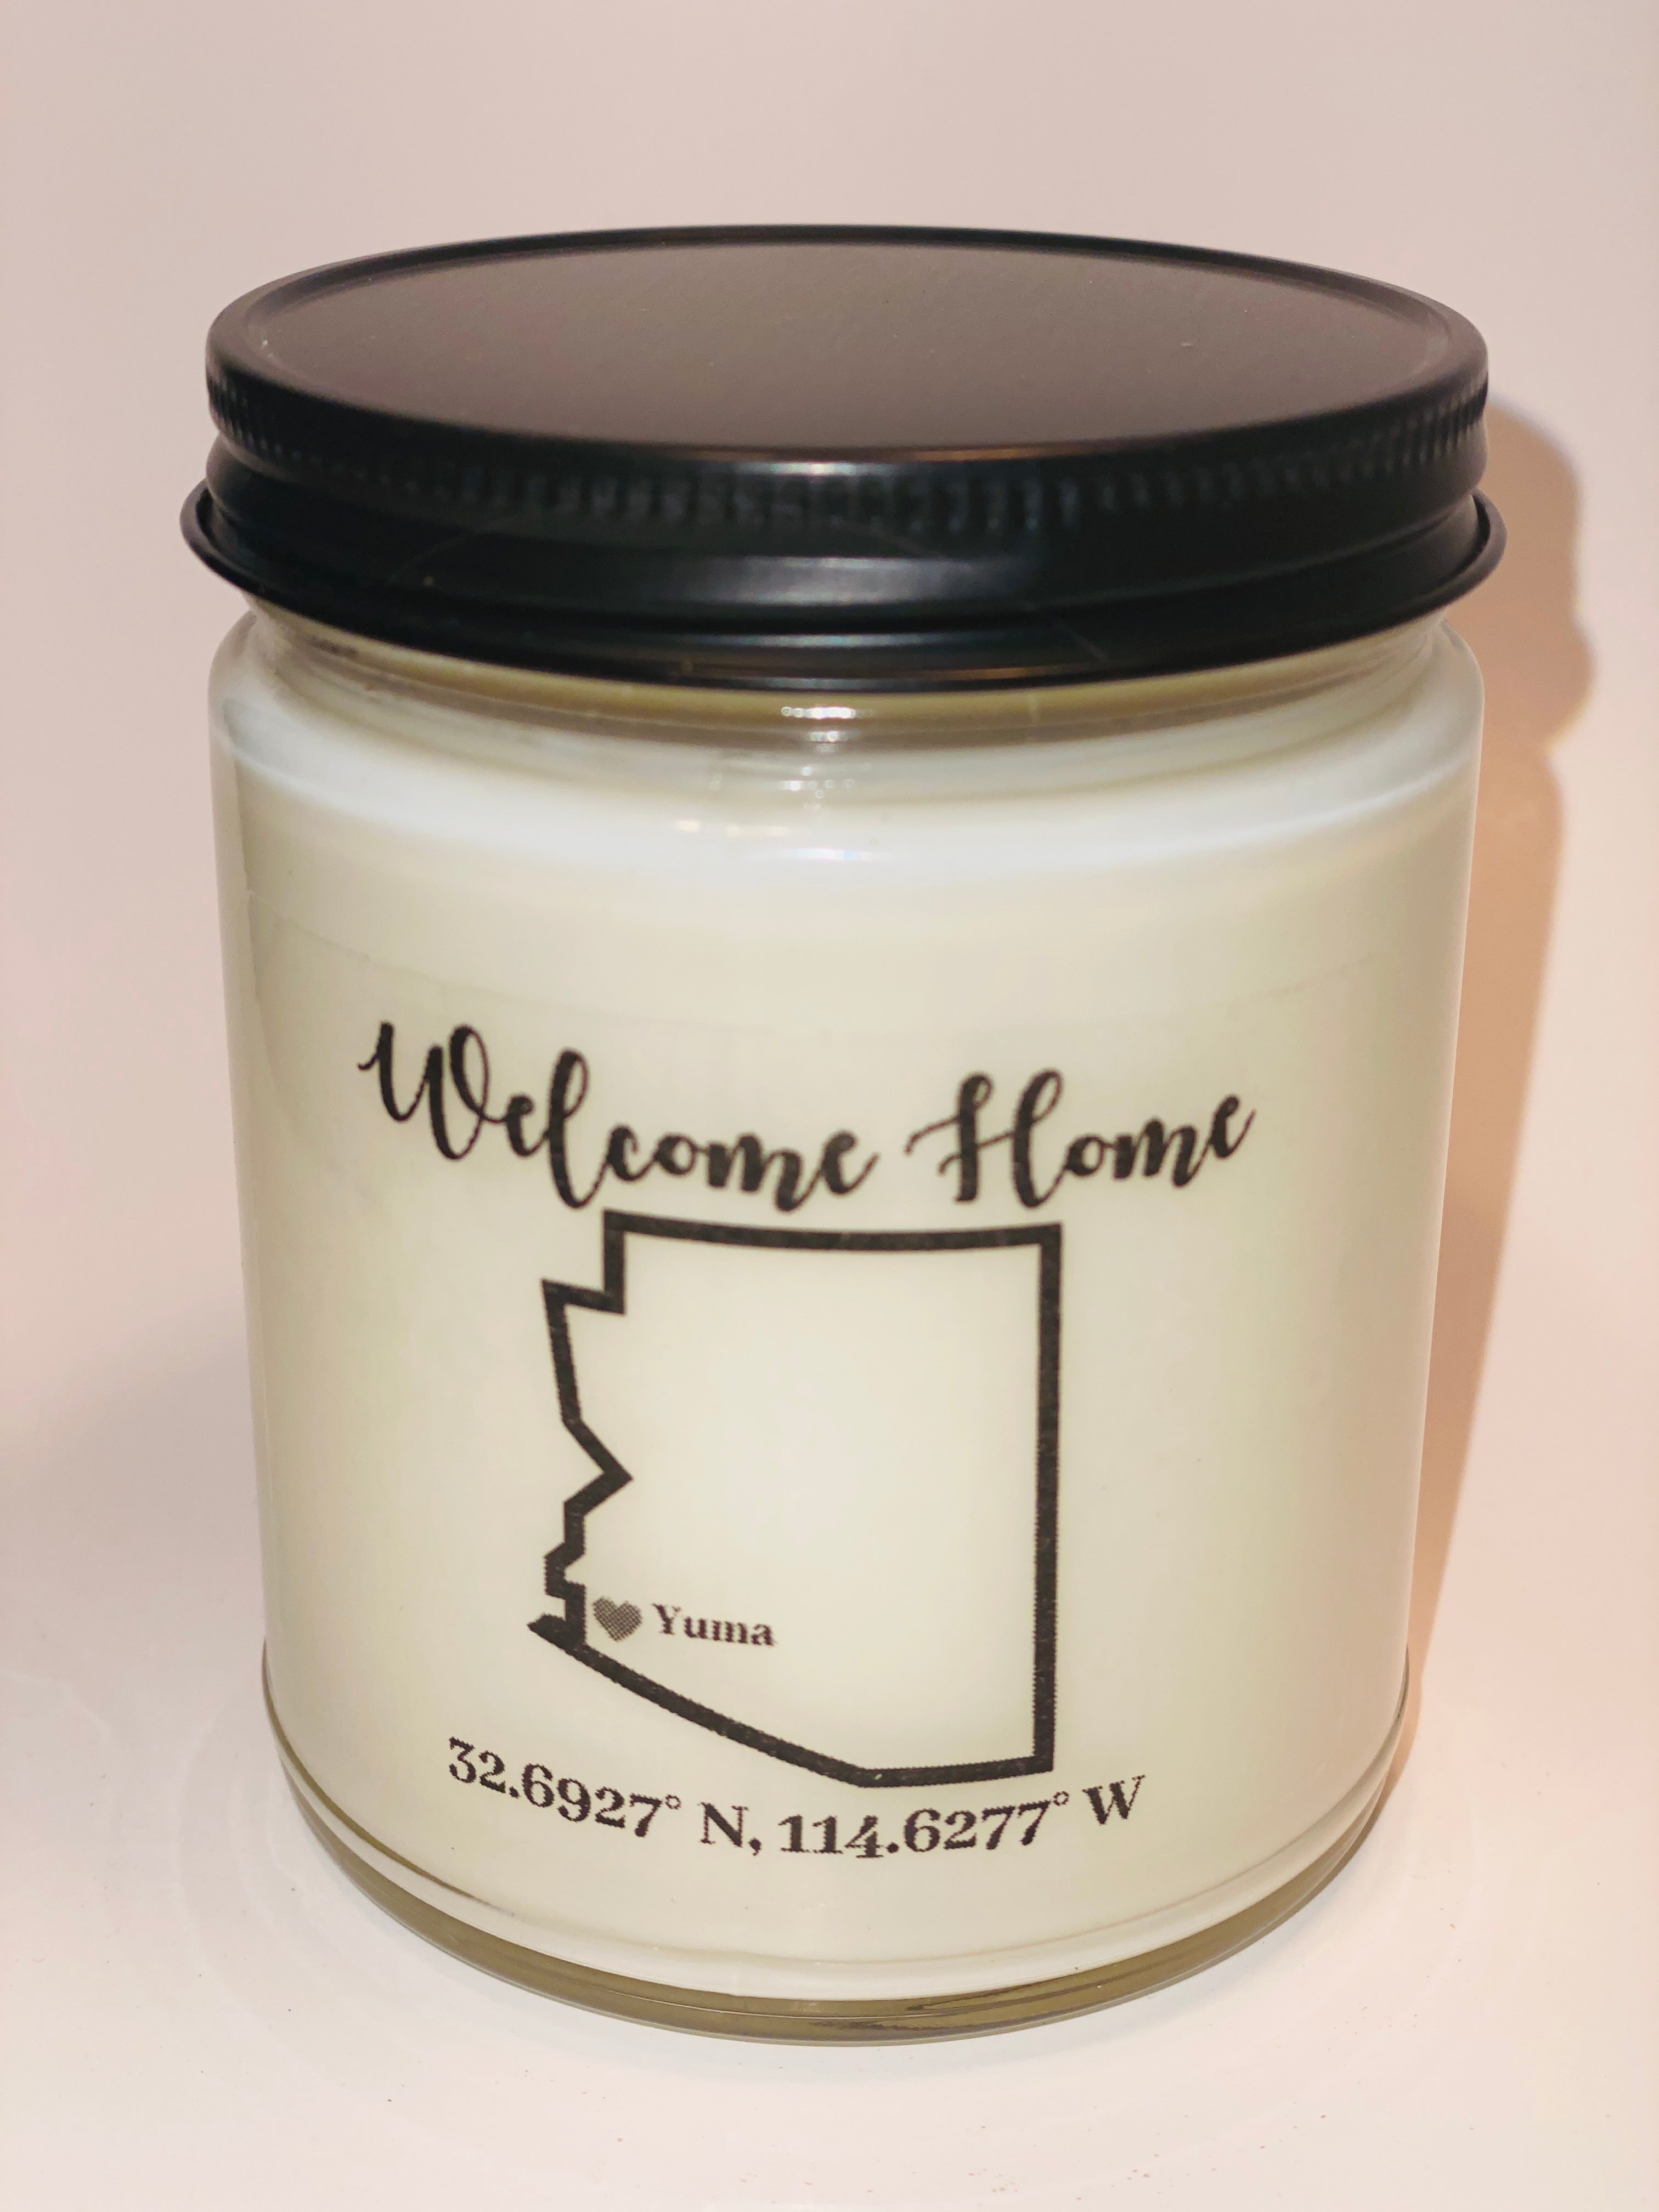 State Candles - Redemption Candle Company